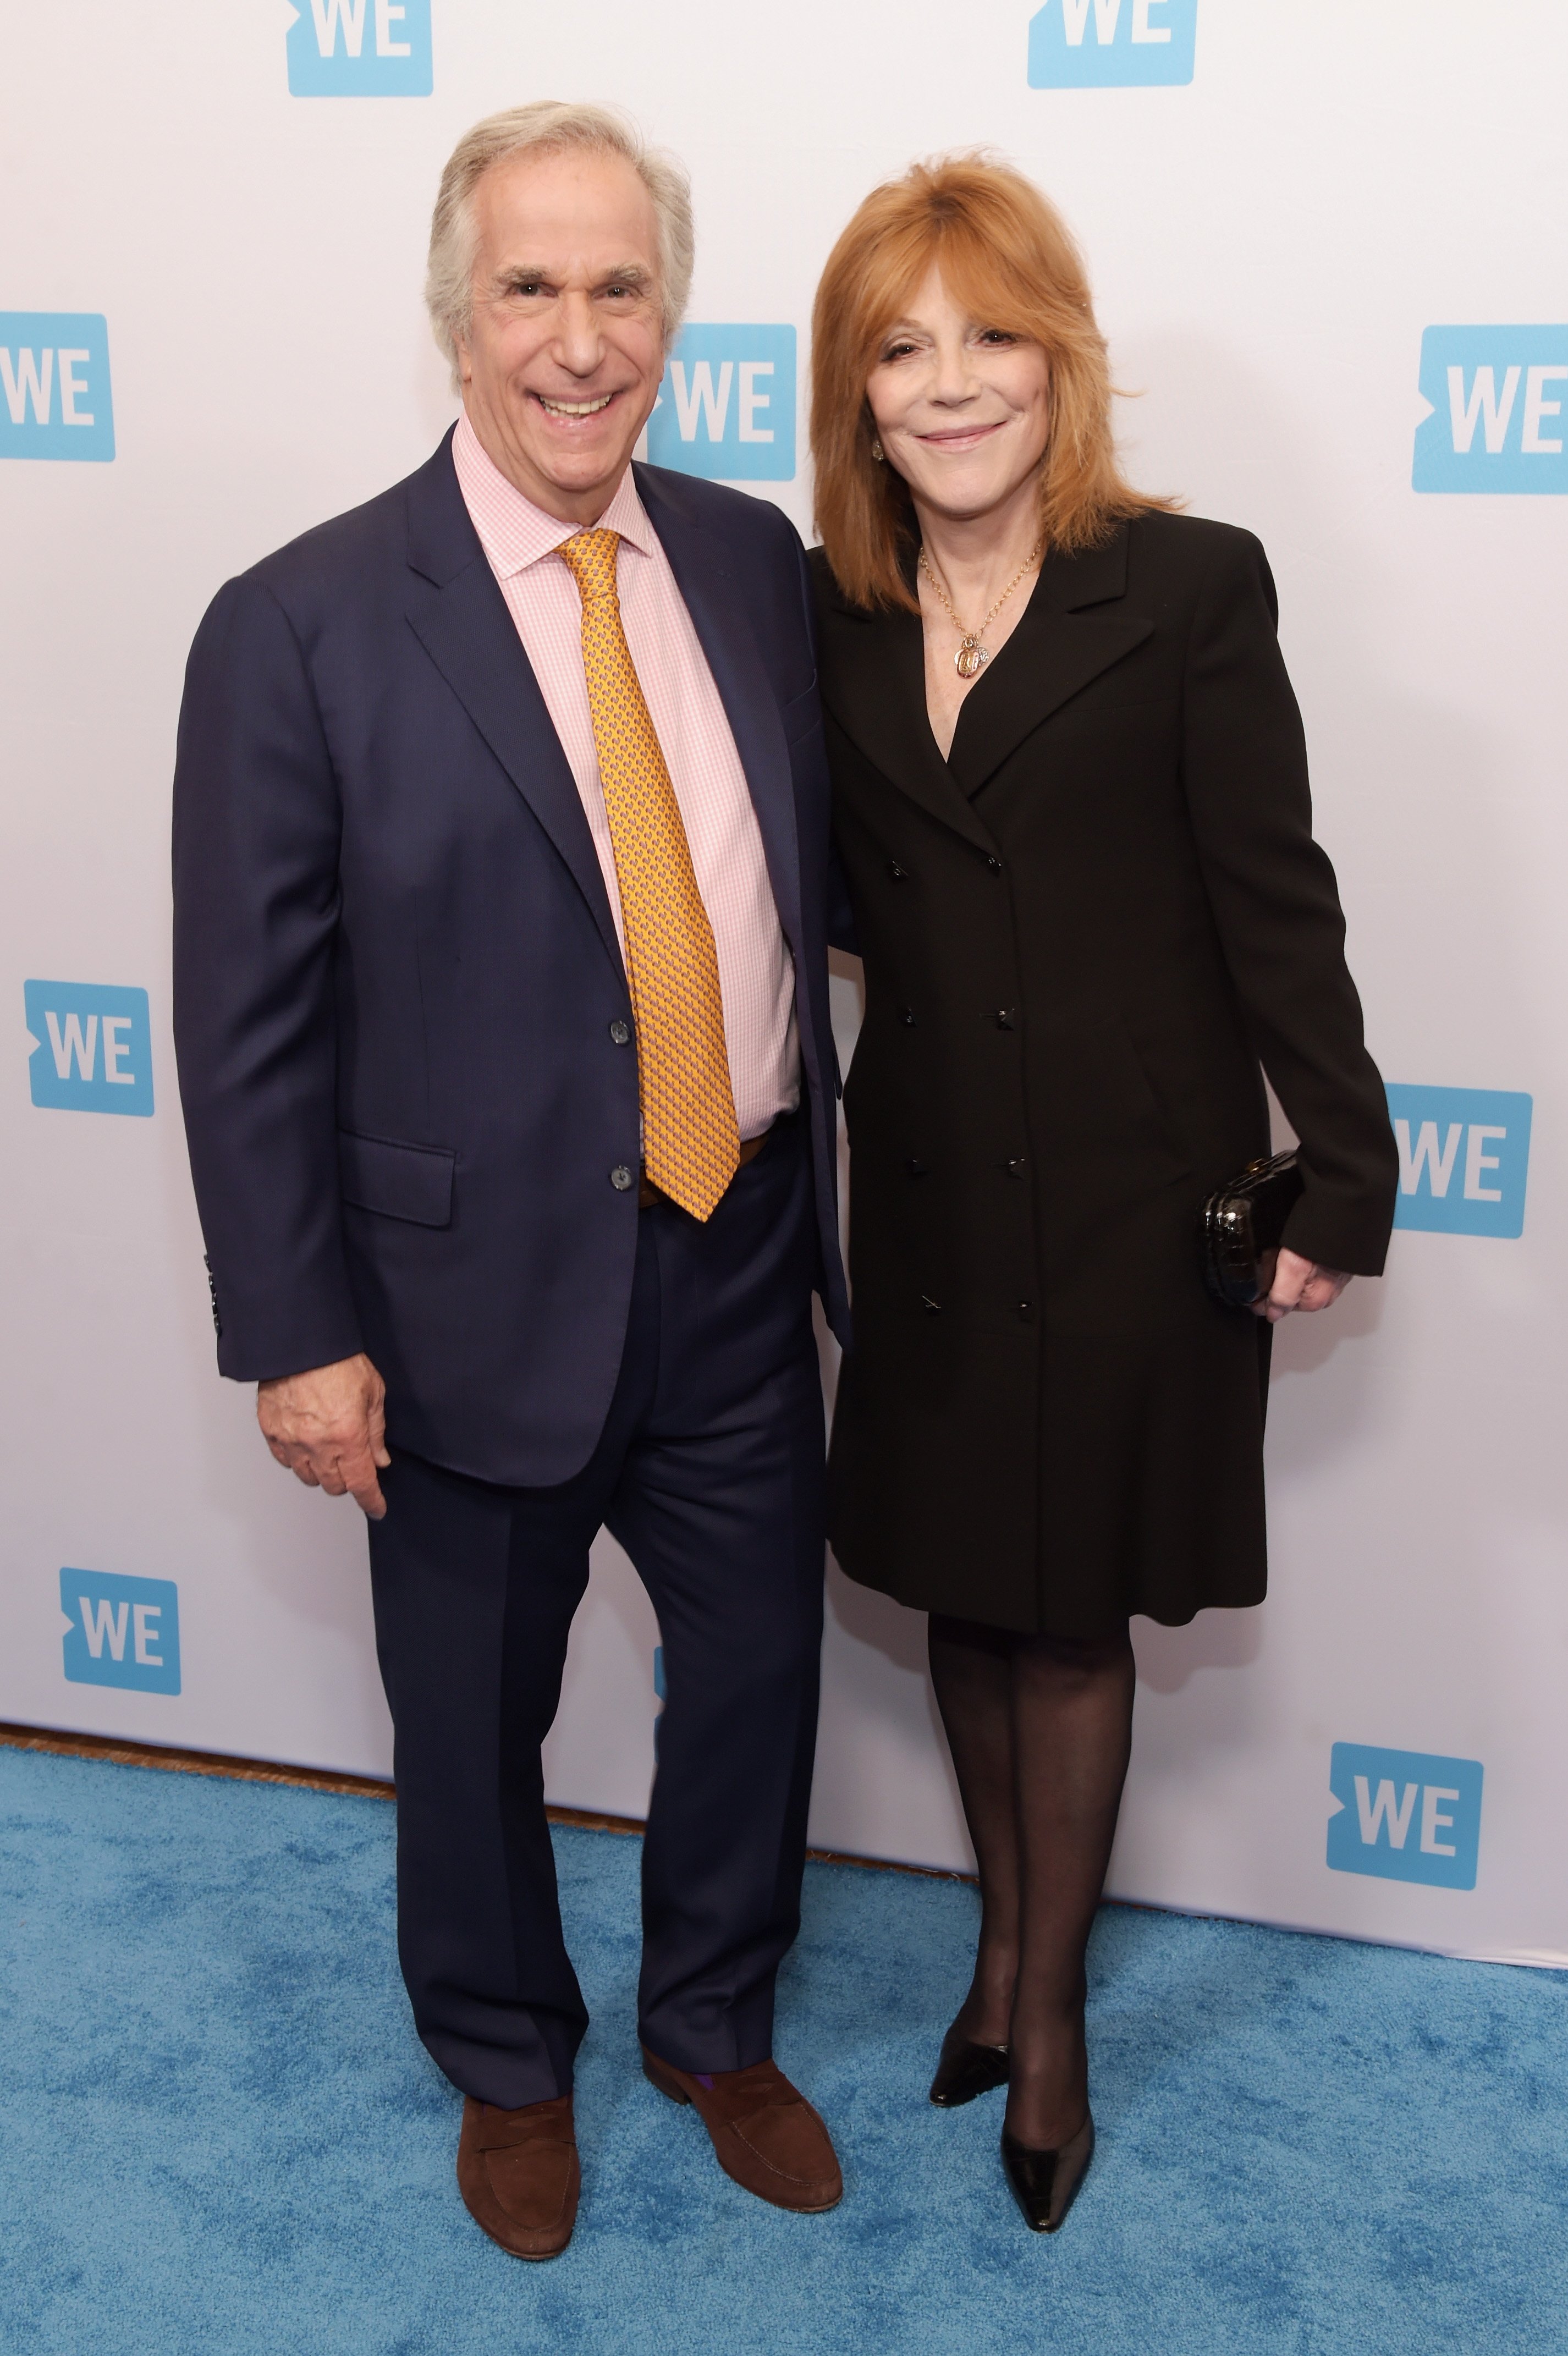 Henry Winkler and his wife, Stacey, attend the WE Day Celebration Dinner at The Beverly Hilton Hotel on April 6, 2016 in Beverly Hills, California | Source: Getty Images 